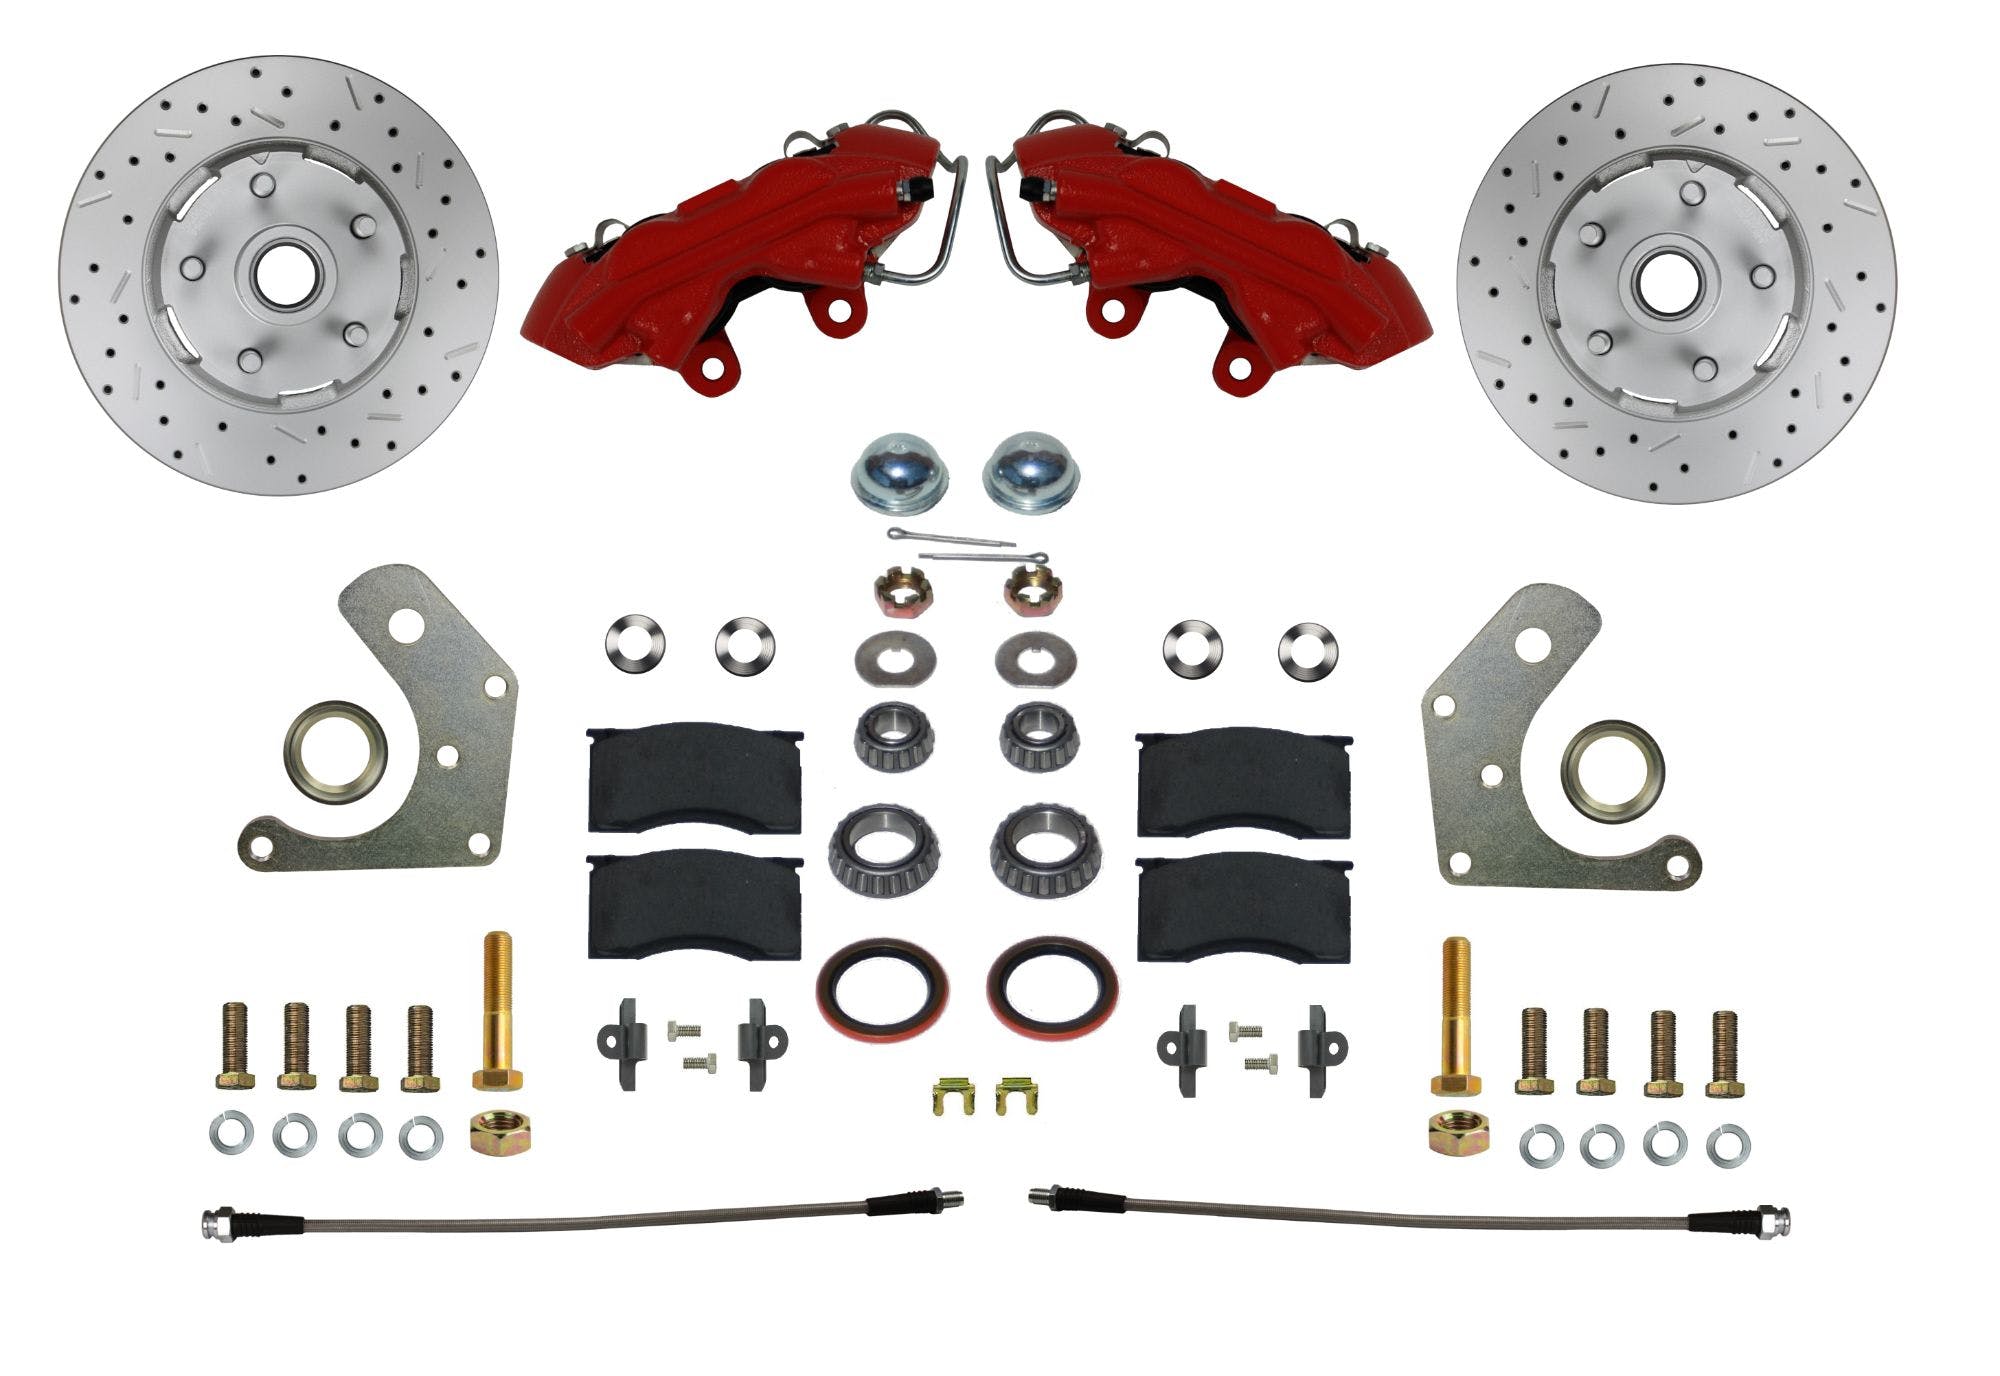 LEED Brakes RFC2002SMX Mopar B and E Body MaxGrip XDS Conversion Kit - Spindle Mount - Red Powder Coat